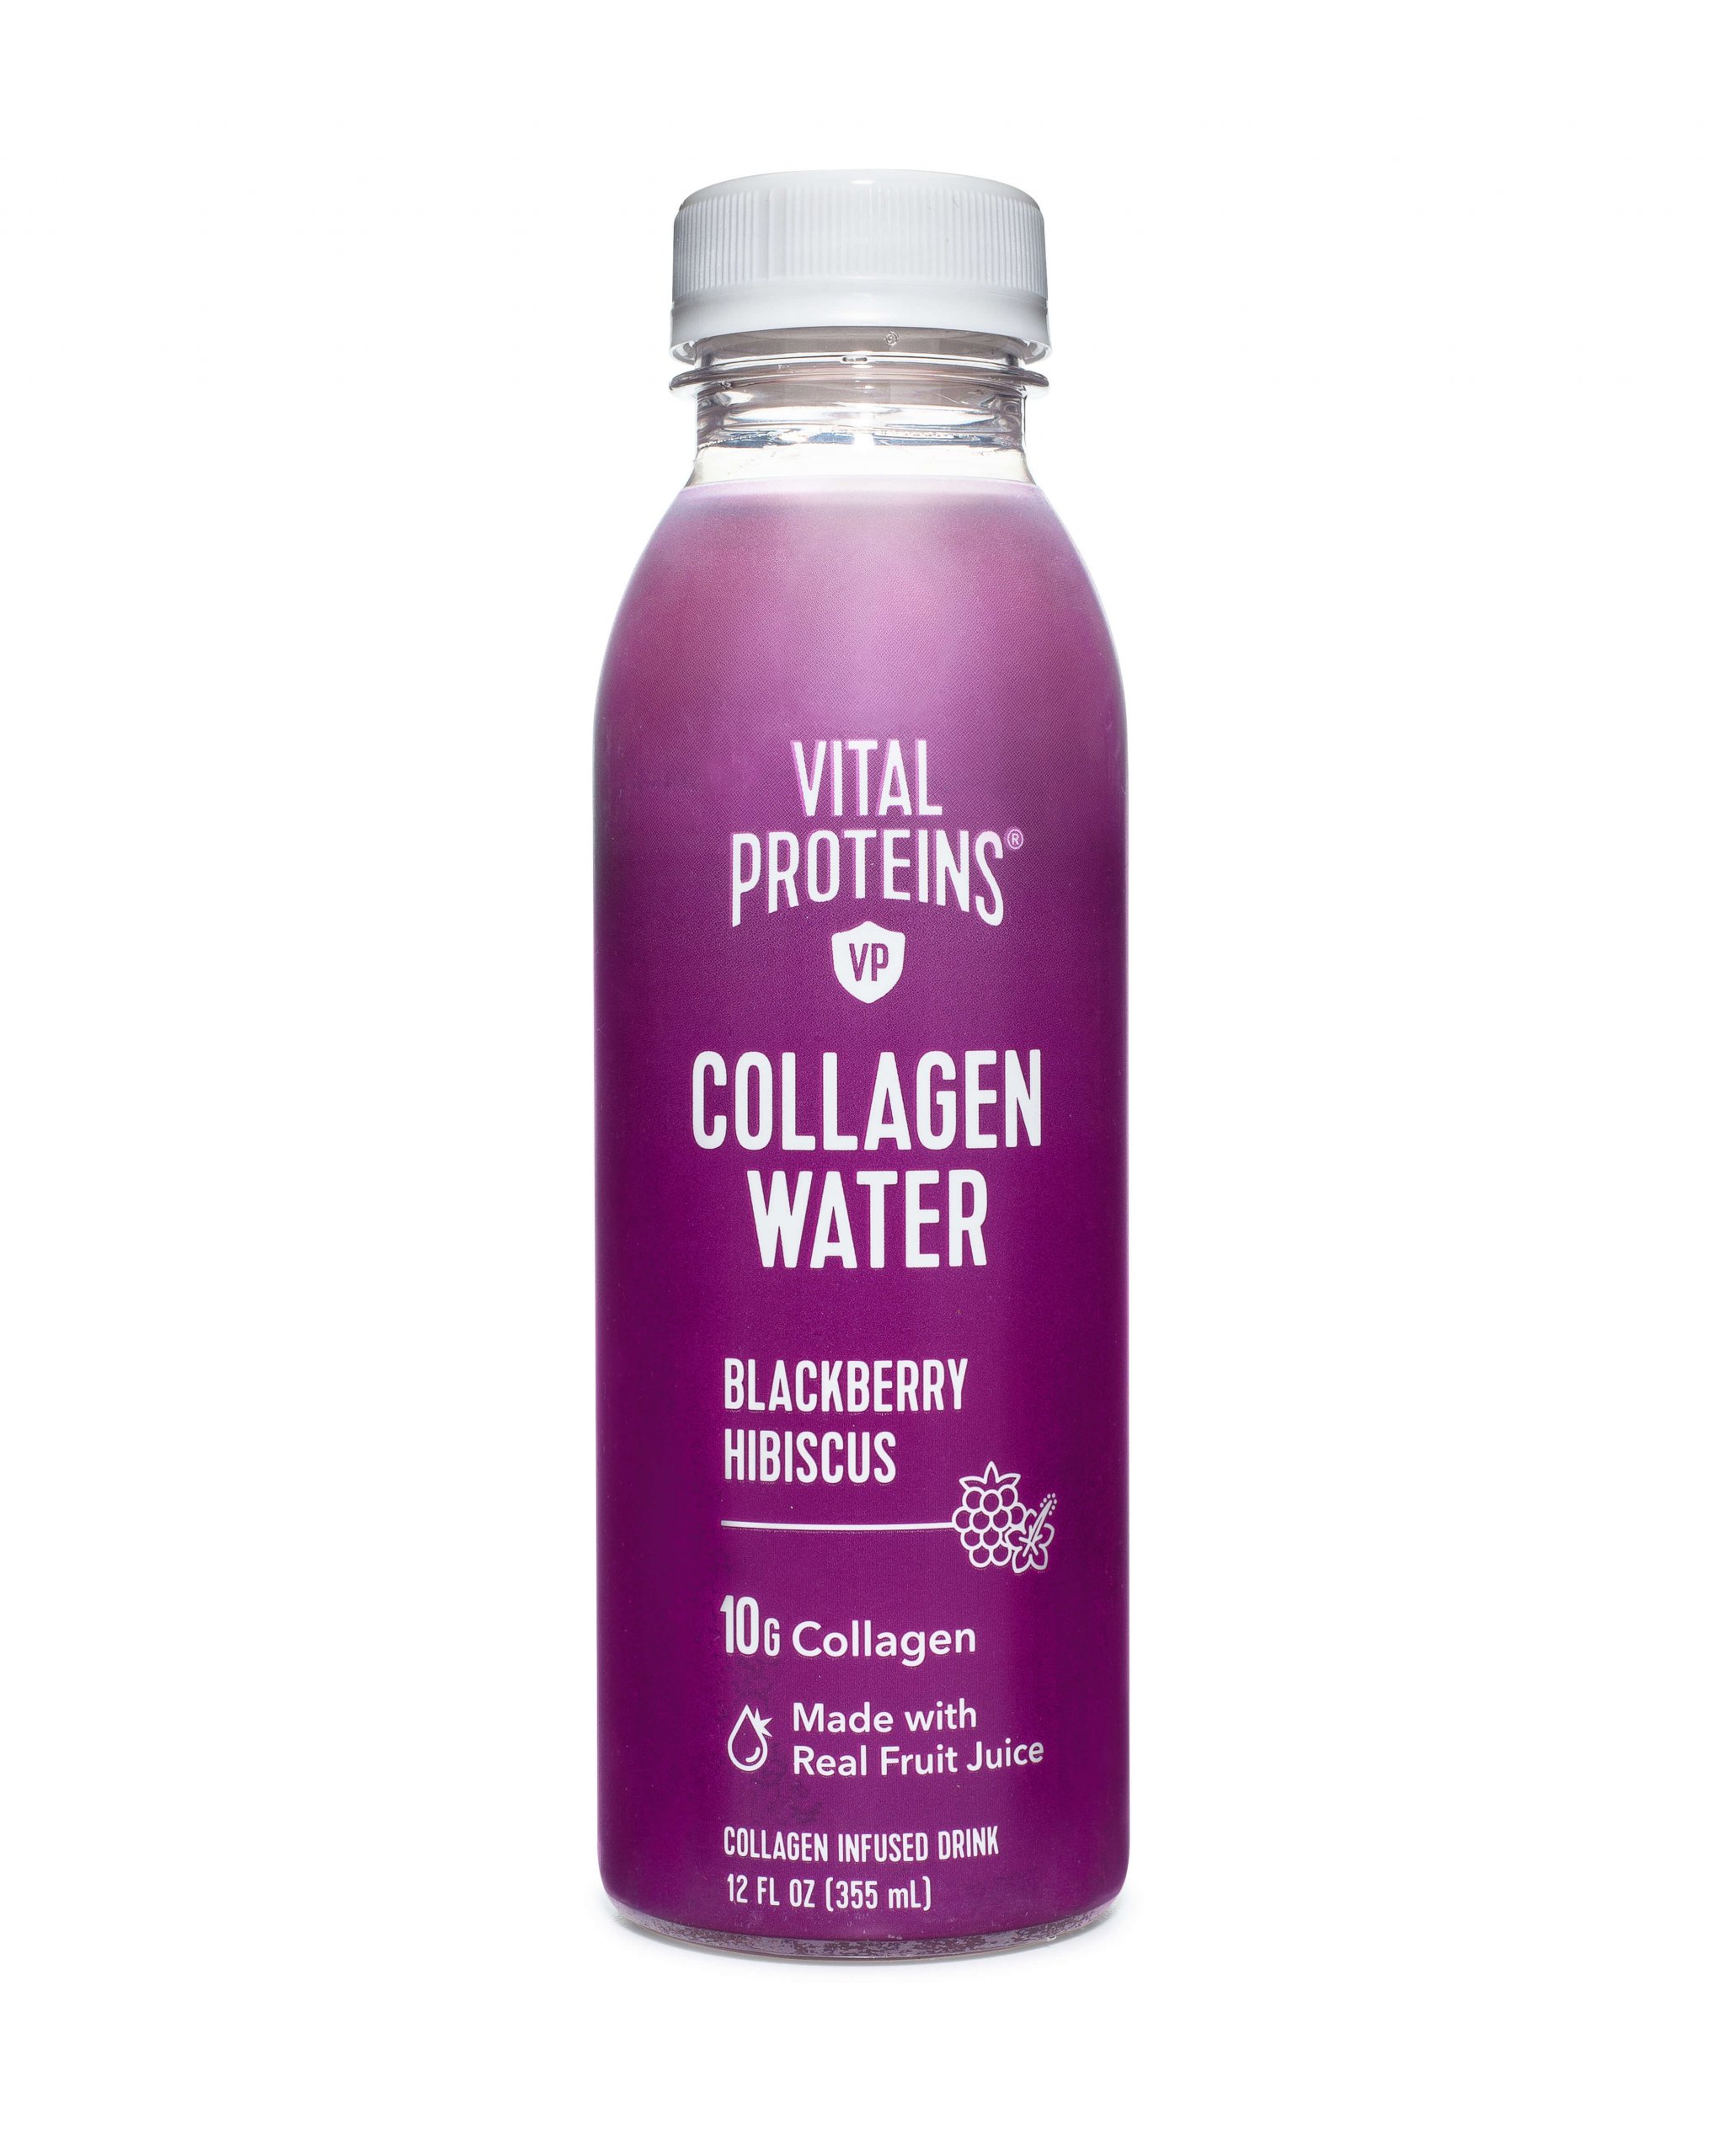 Vital Proteins Collagen Water Hits Costco Shelves Socal Magazine,John F Kennedy Junior Young